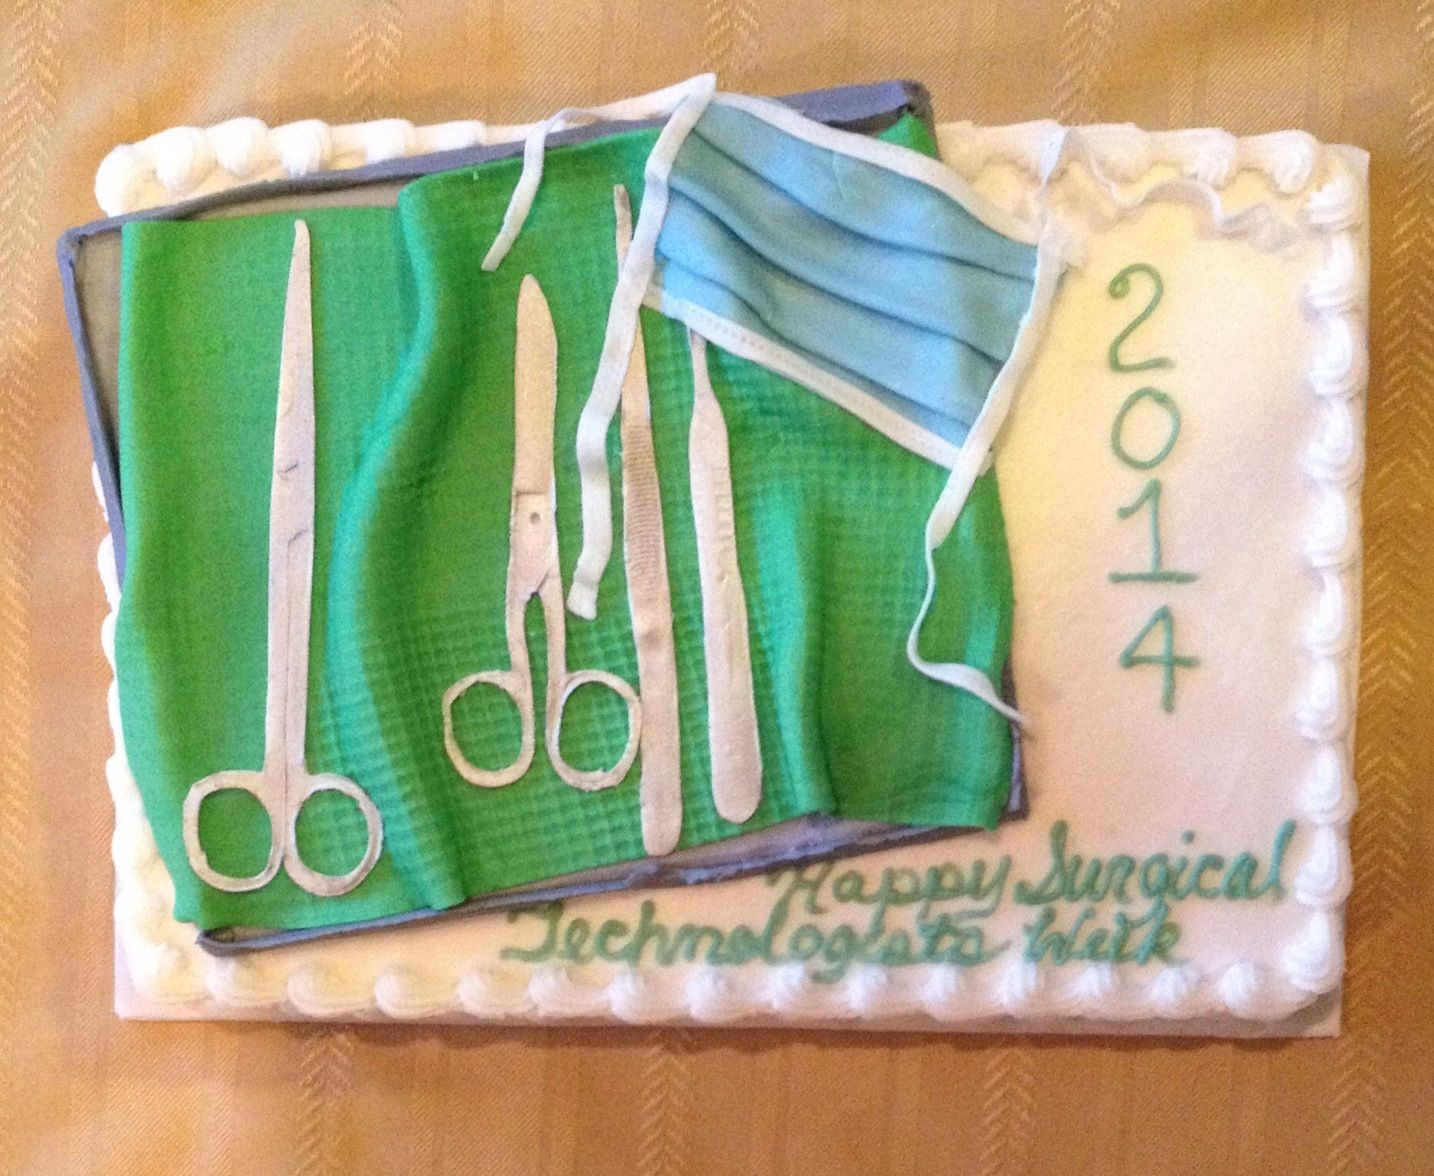 Surgical Tech Graduation Party Ideas
 Surgical Technologists Week Cake 9x13 Sheet Cake I made